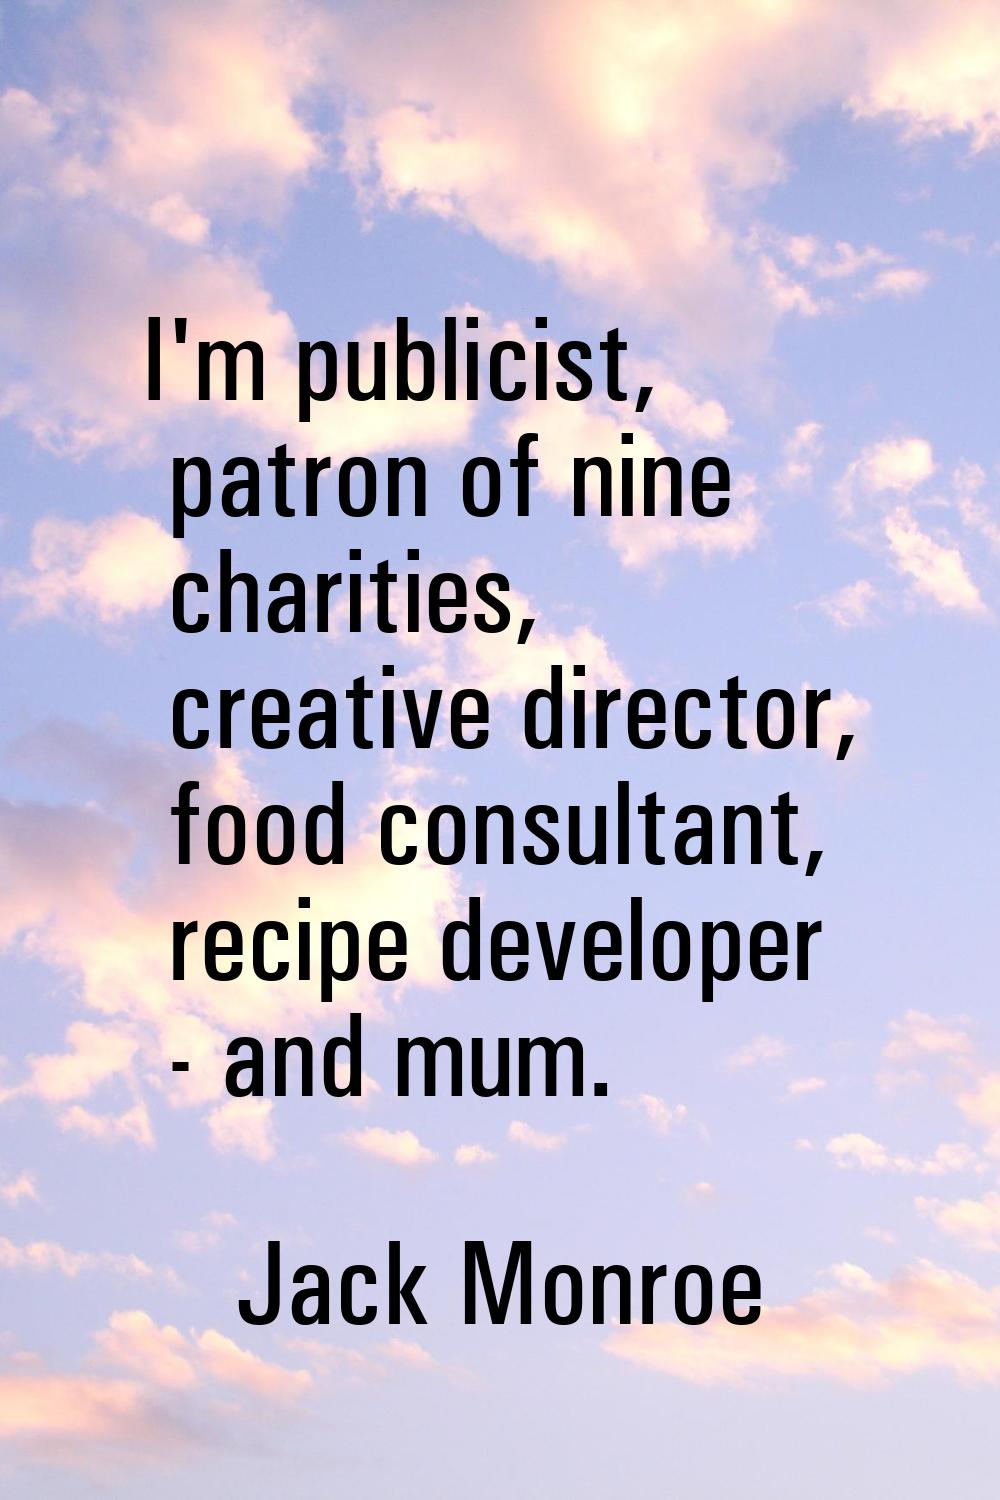 I'm publicist, patron of nine charities, creative director, food consultant, recipe developer - and